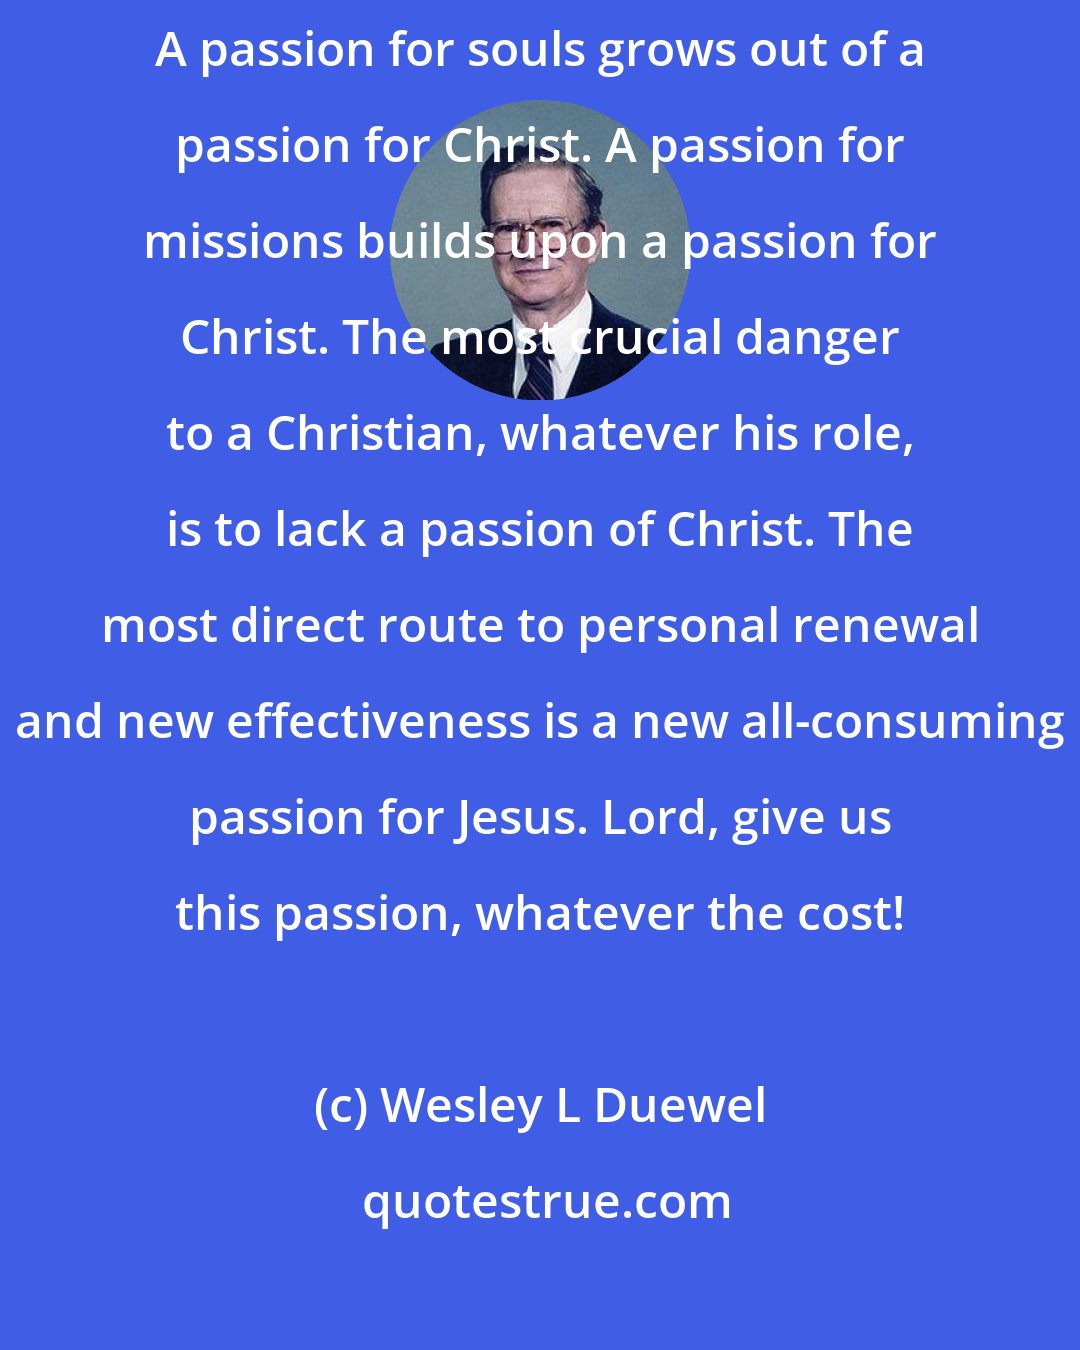 Wesley L Duewel: All other passions build upon or flow from your passion for Jesus. A passion for souls grows out of a passion for Christ. A passion for missions builds upon a passion for Christ. The most crucial danger to a Christian, whatever his role, is to lack a passion of Christ. The most direct route to personal renewal and new effectiveness is a new all-consuming passion for Jesus. Lord, give us this passion, whatever the cost!